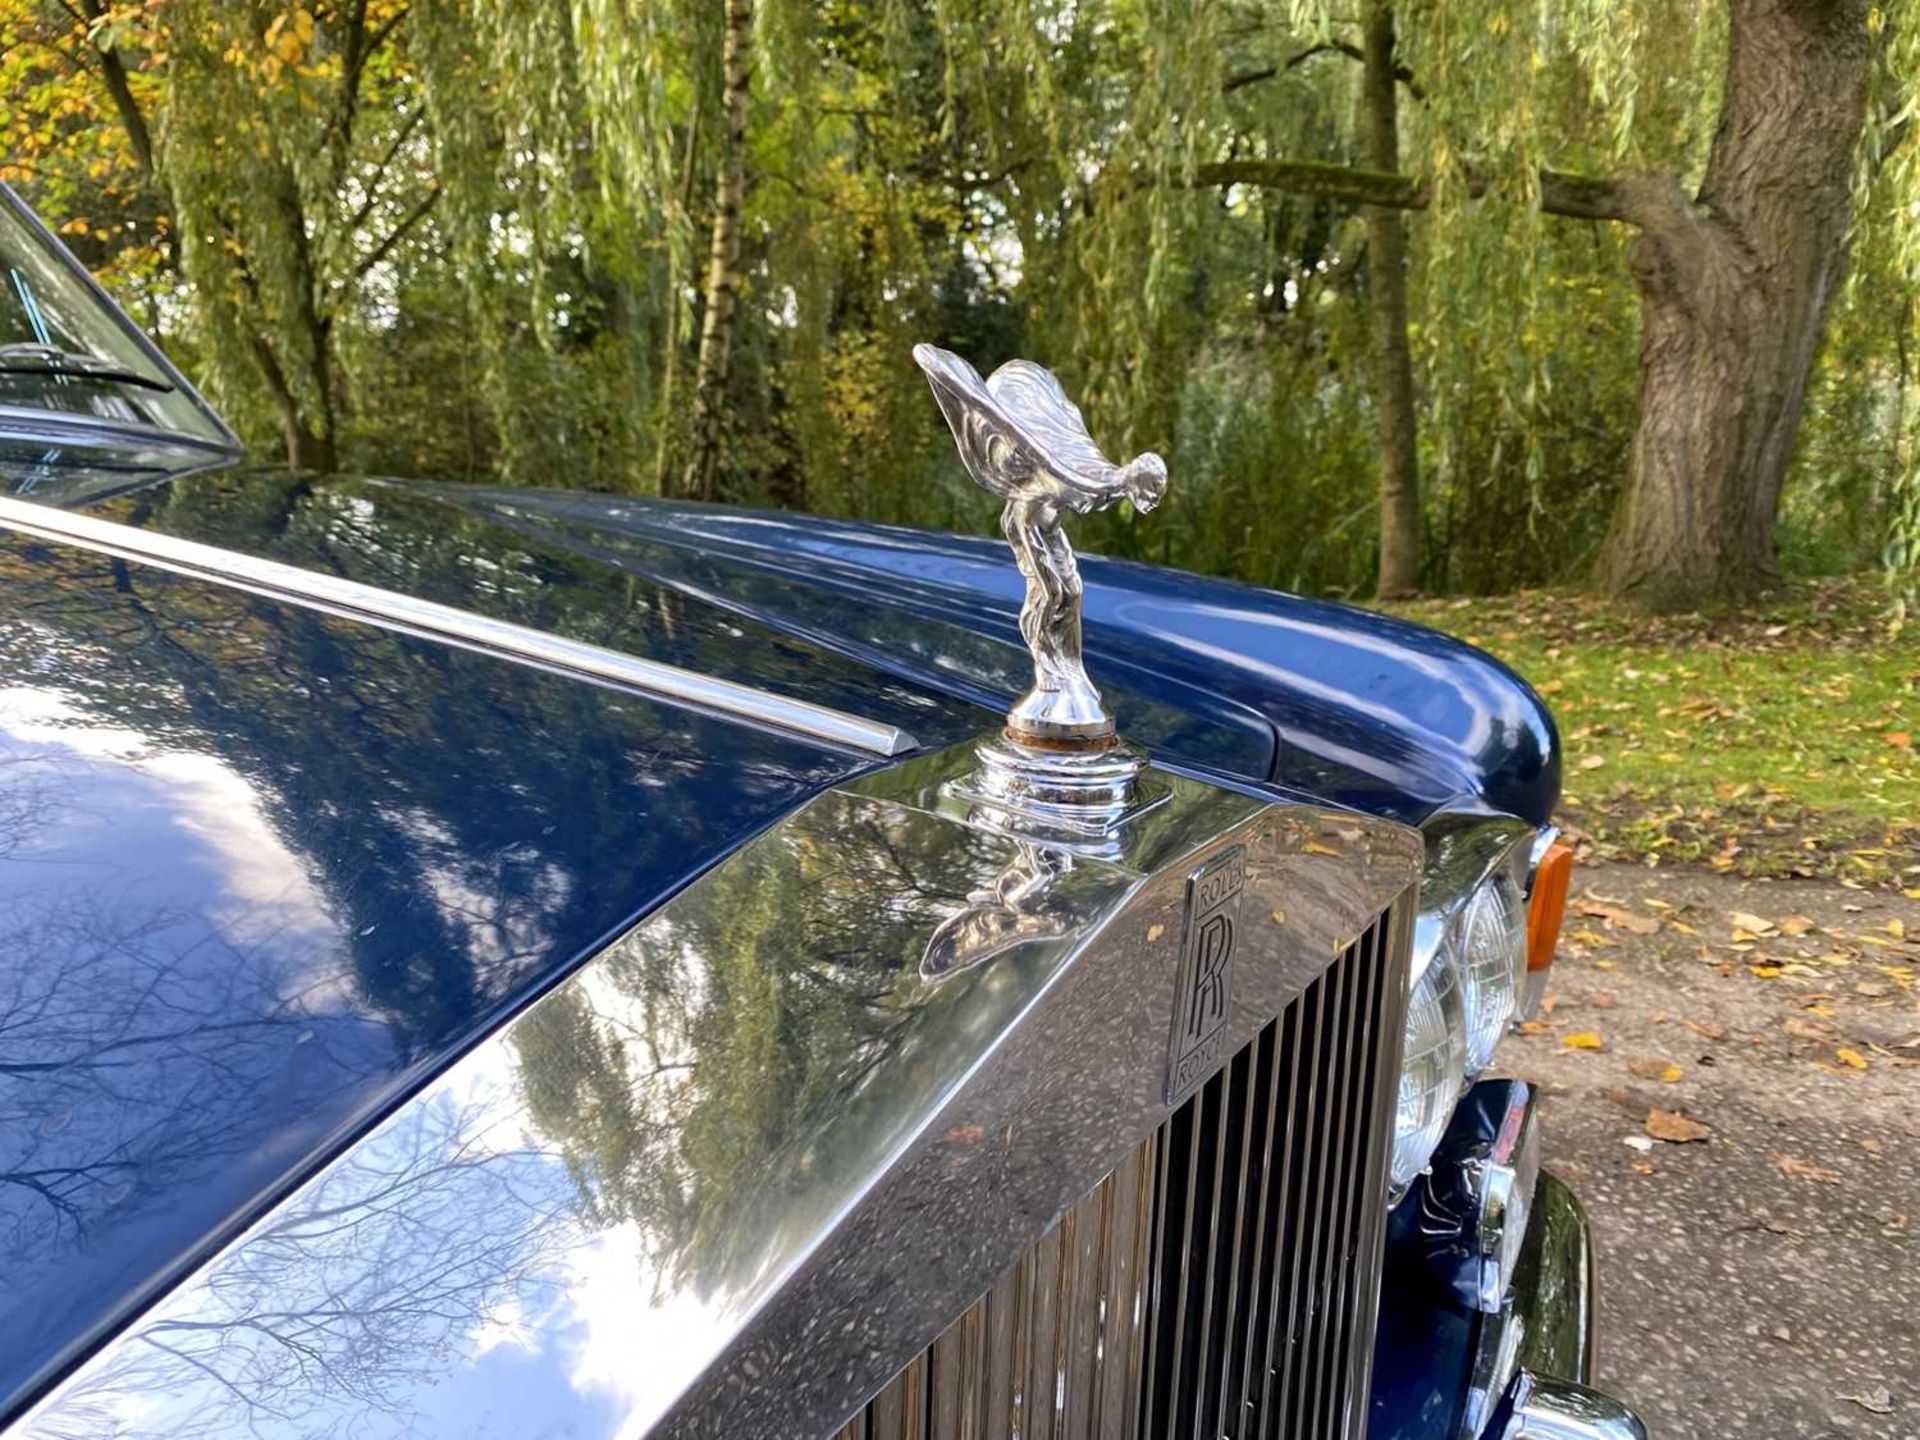 1971 Rolls-Royce Corniche Saloon Finished in Royal Navy Blue with Tobacco hide - Image 75 of 100